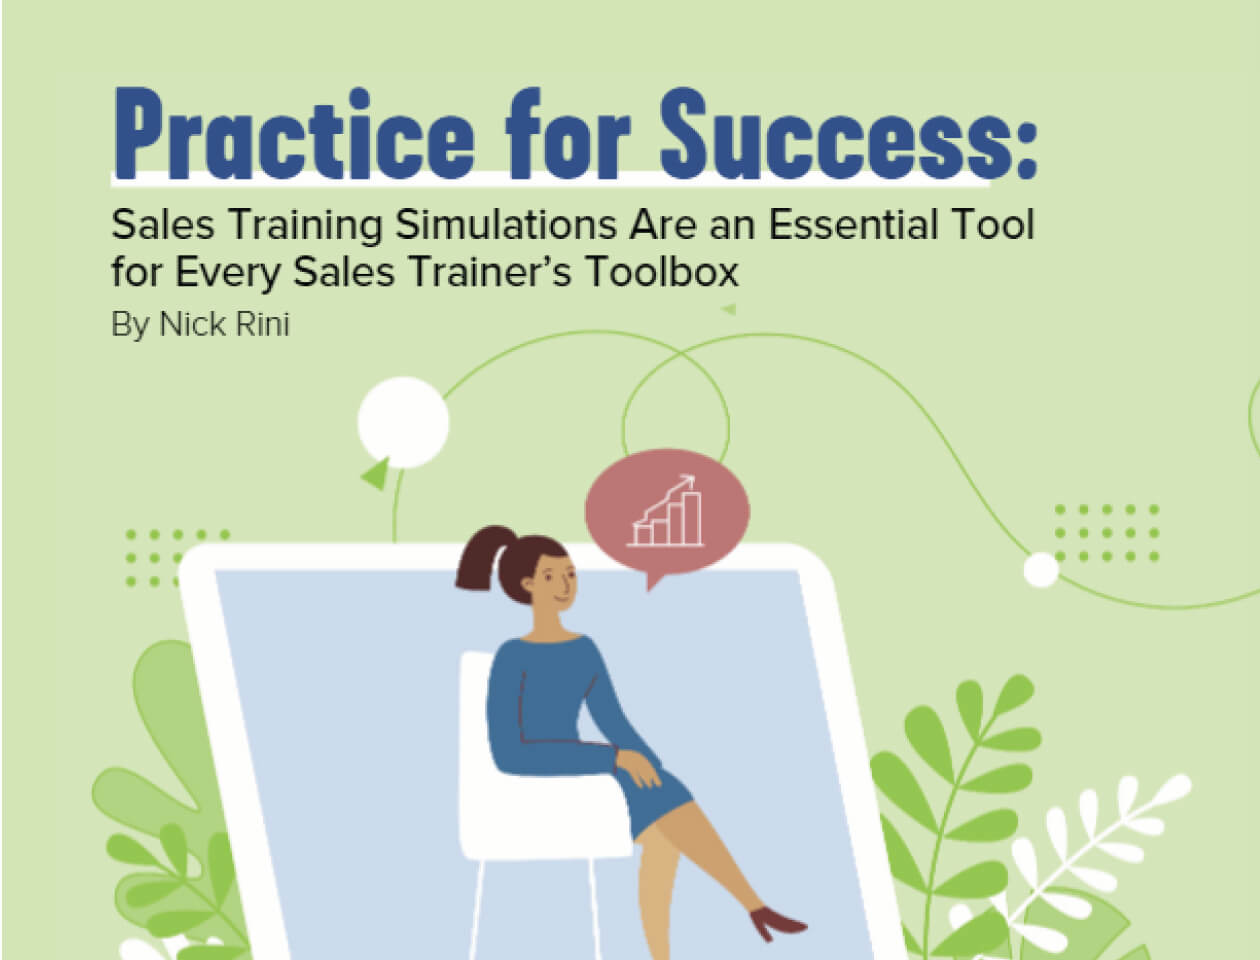 Practice for Success: Sales Training Simulations Are an Essential Tool for Every Sales Trainer’s Toolbox